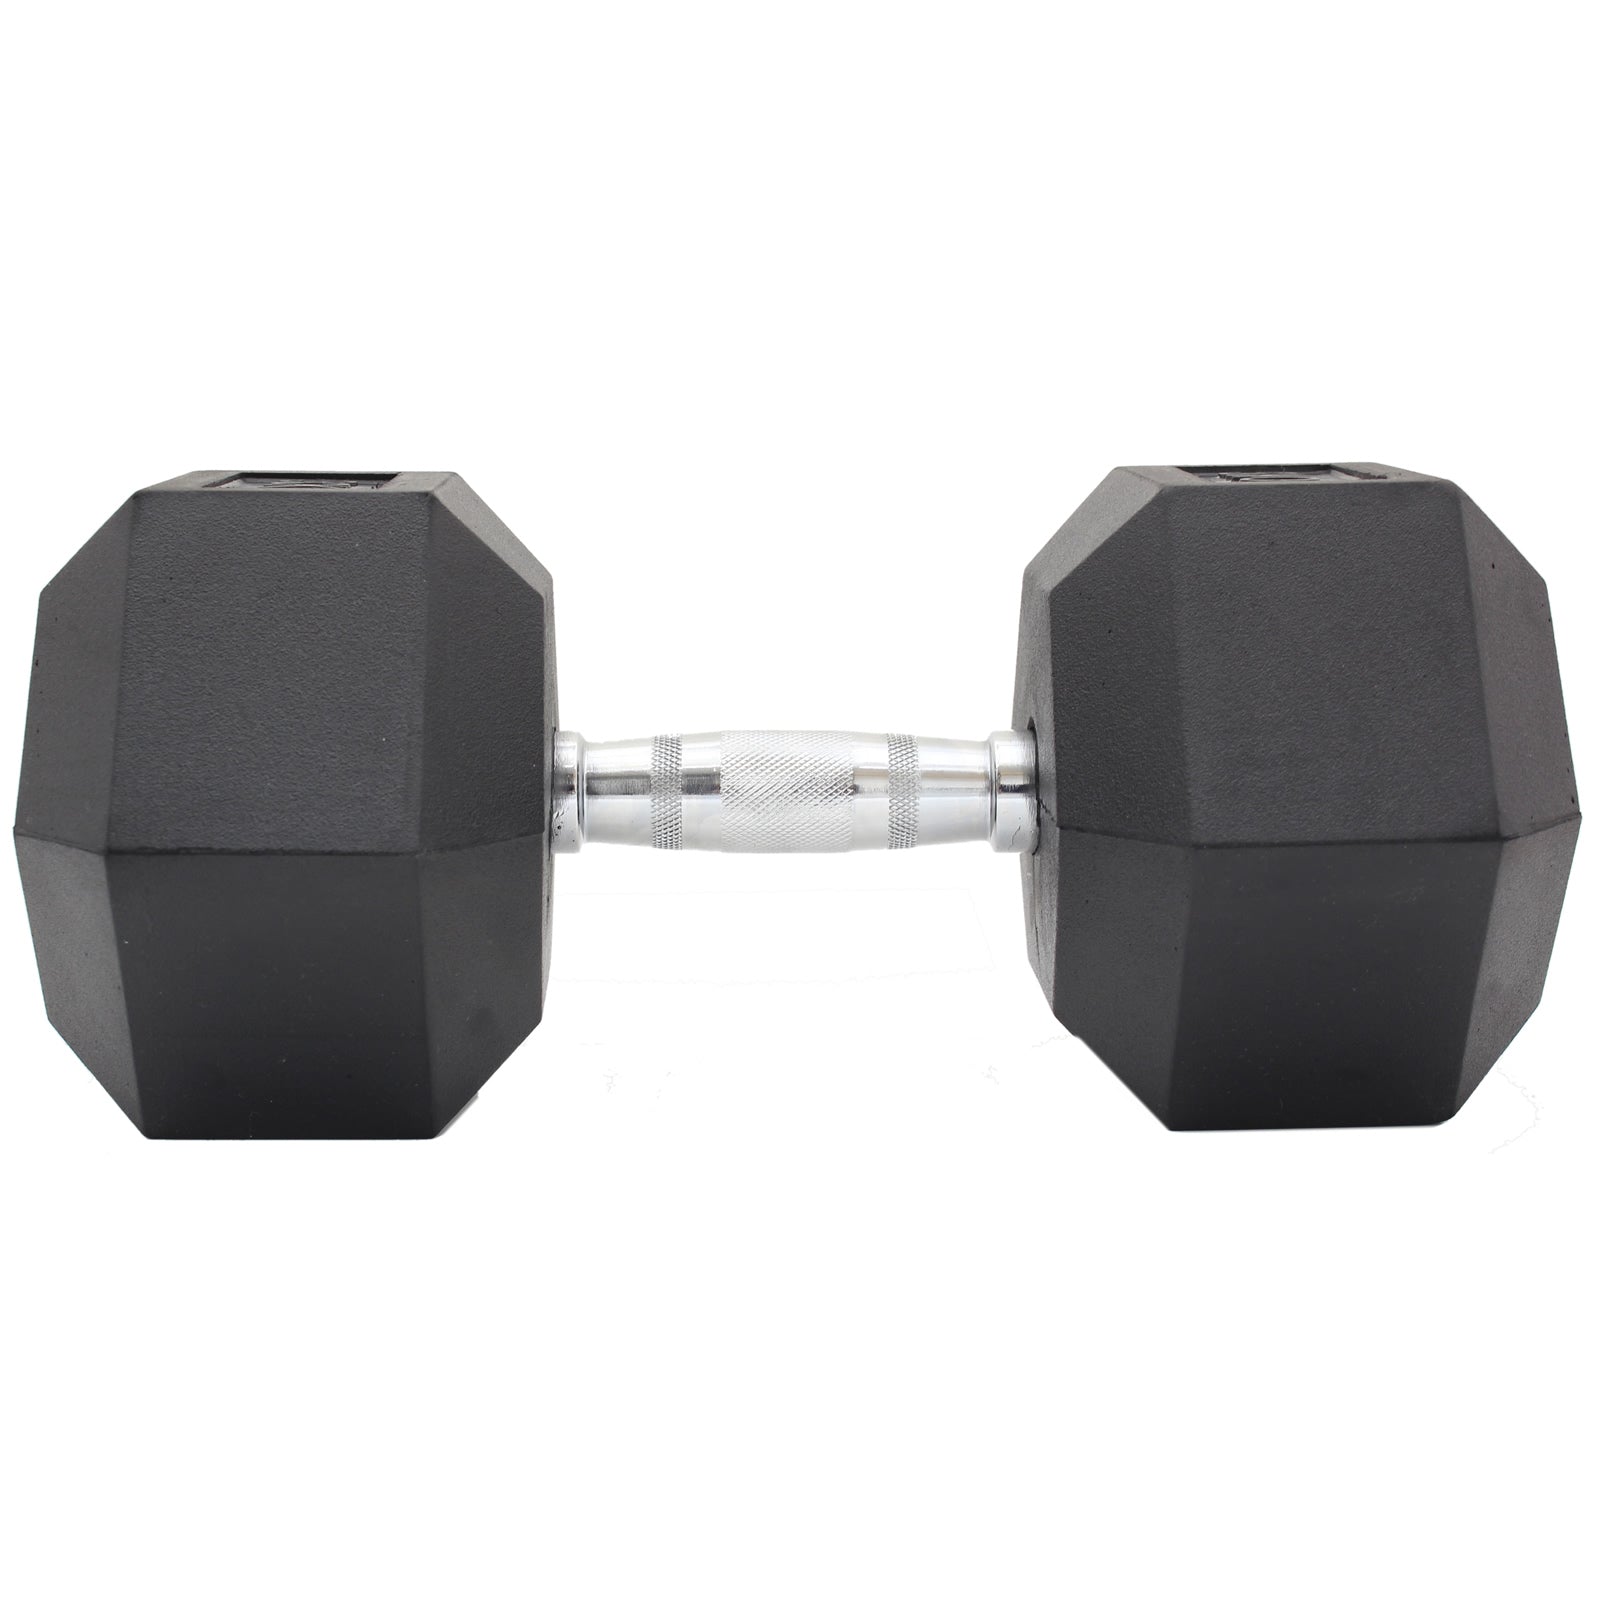 25KG Commercial Rubber Hex Dumbbell Gym Weight - image2